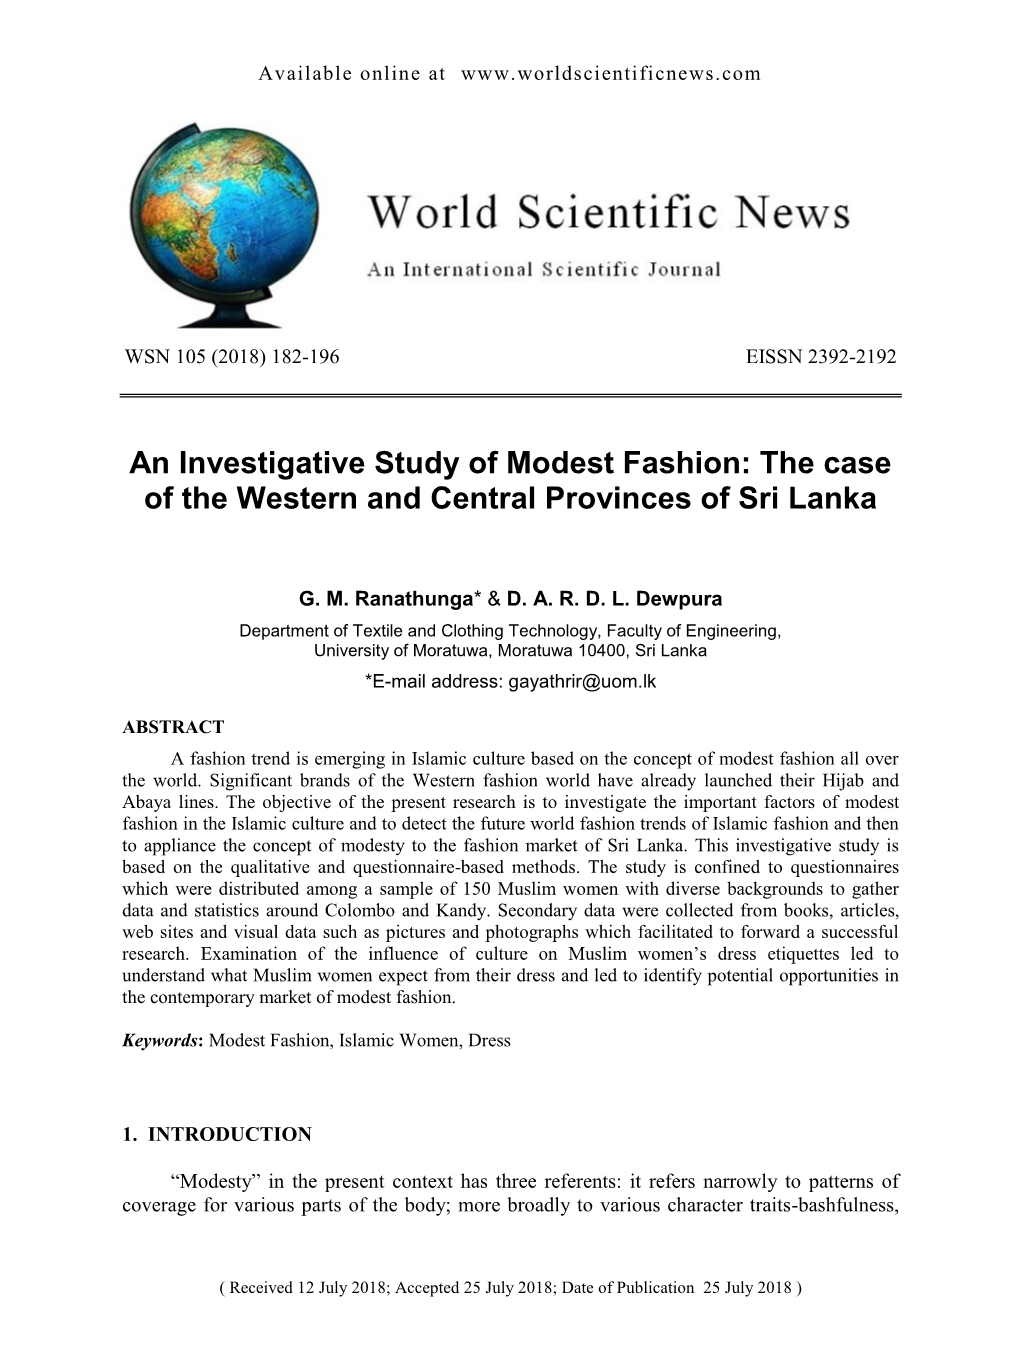 An Investigative Study of Modest Fashion: the Case of the Western and Central Provinces of Sri Lanka